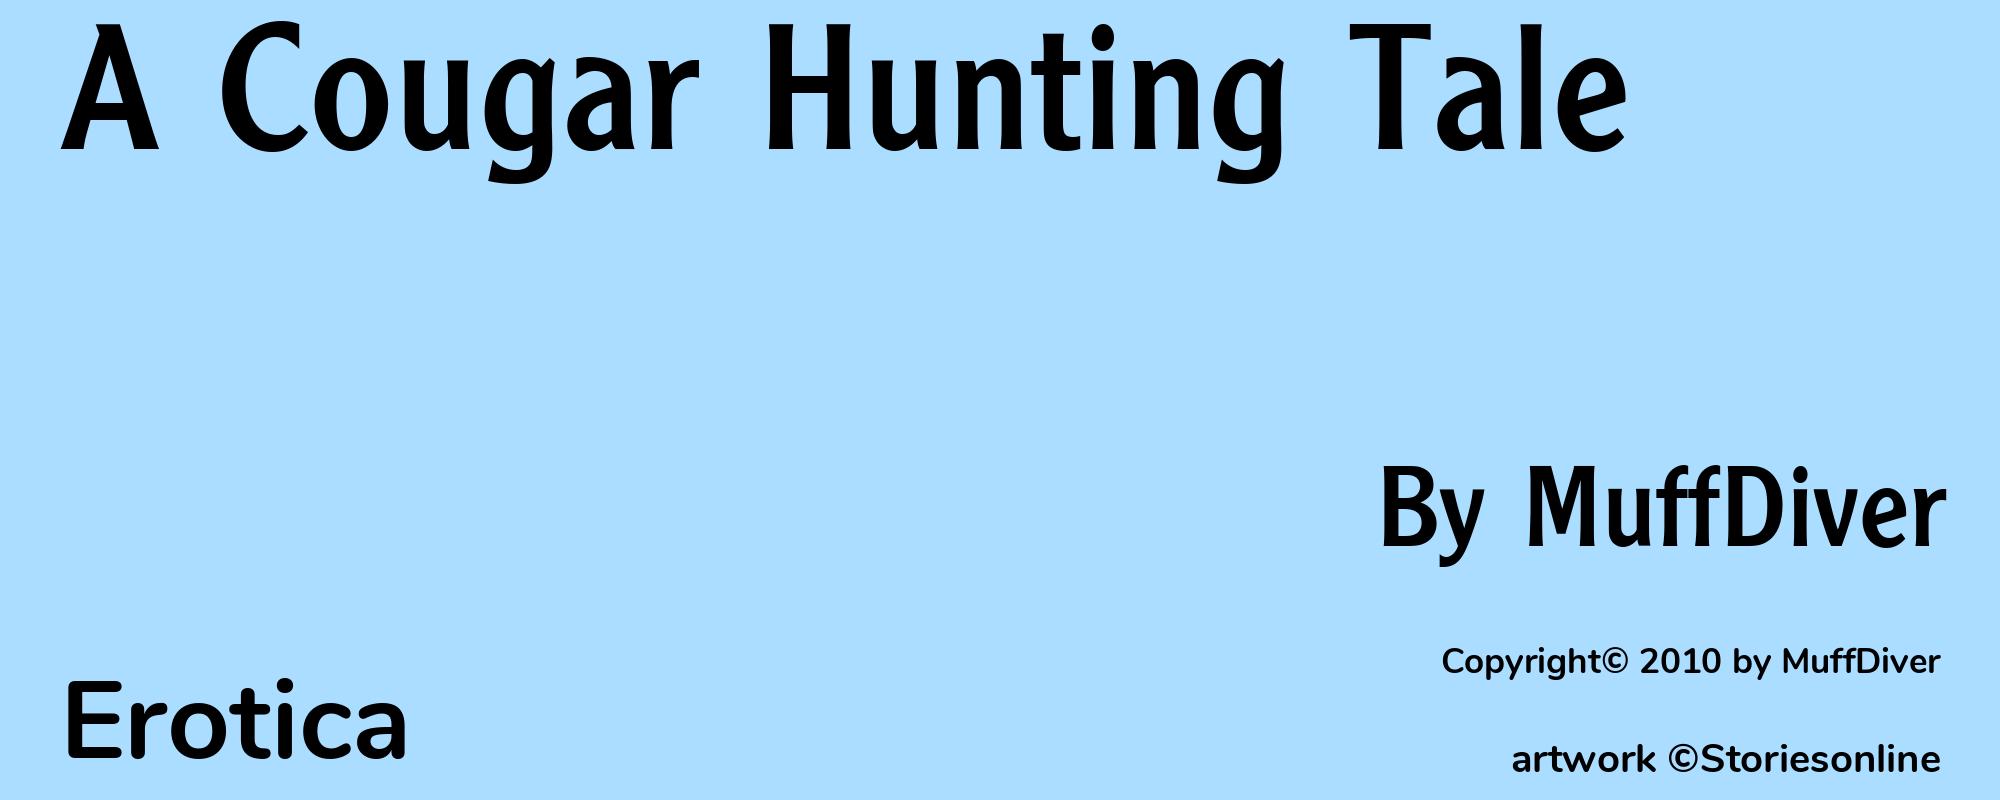 A Cougar Hunting Tale - Cover